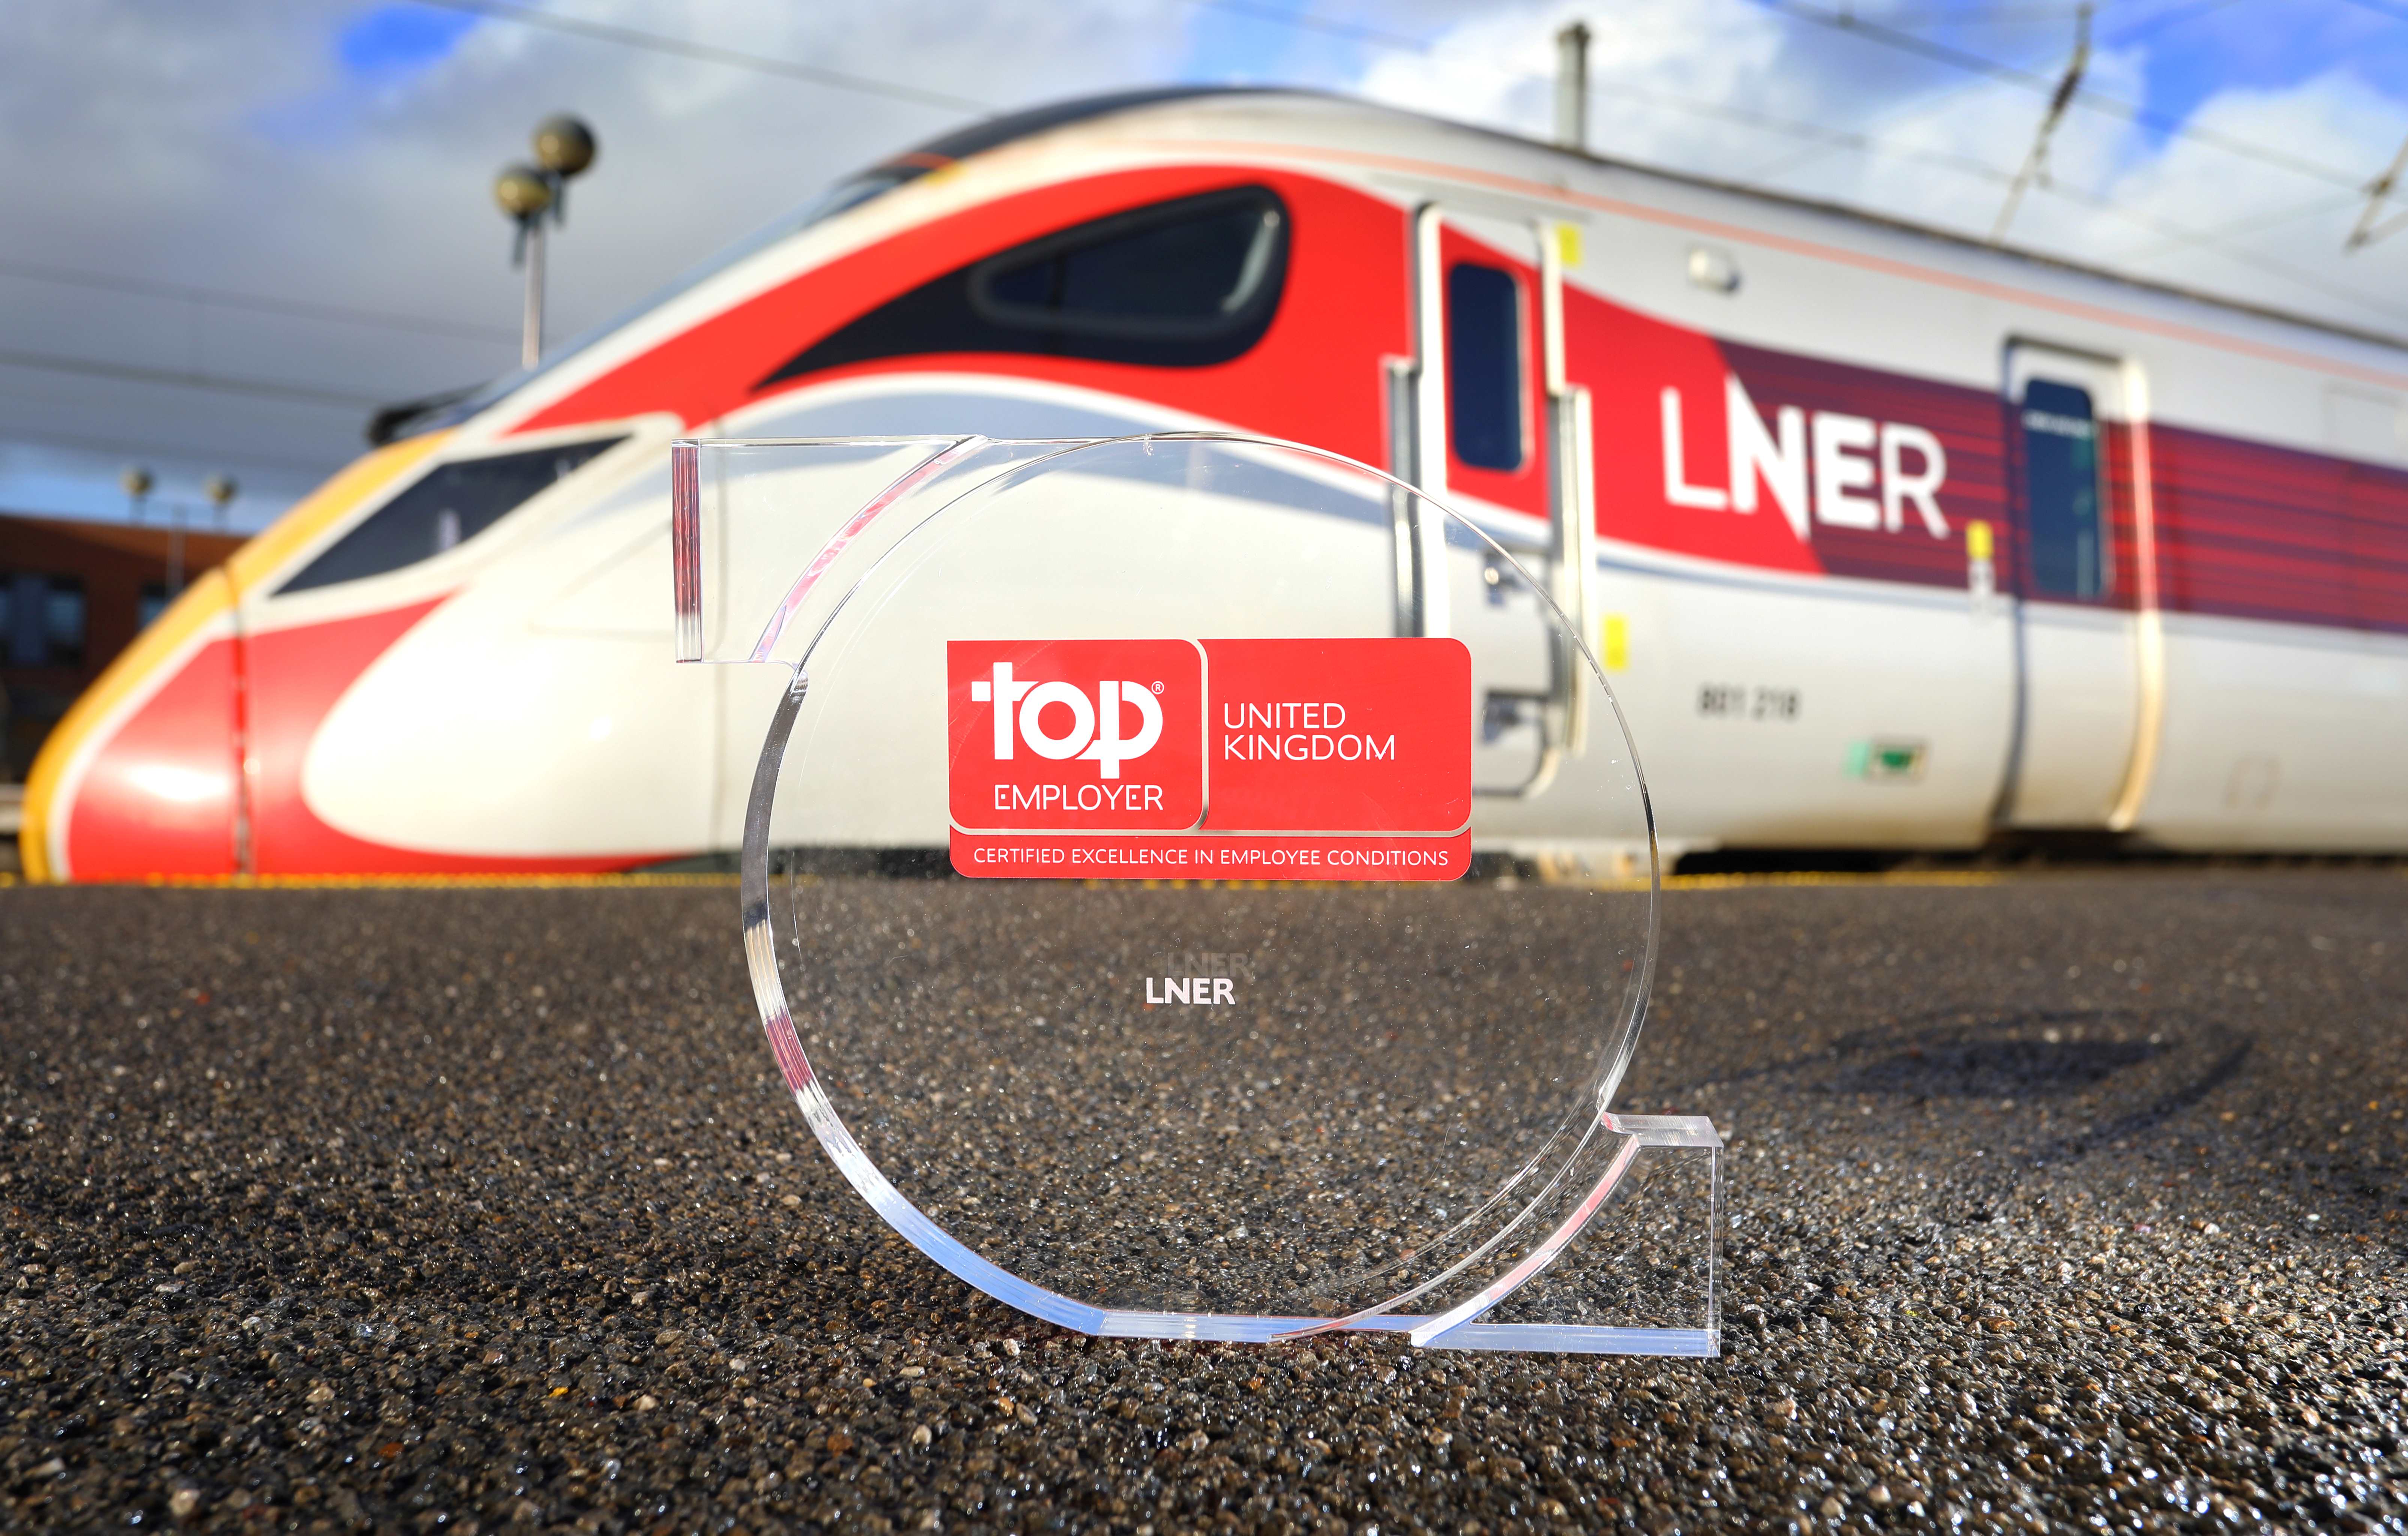 LNER Named Top Employer For Fifth Year In A Row